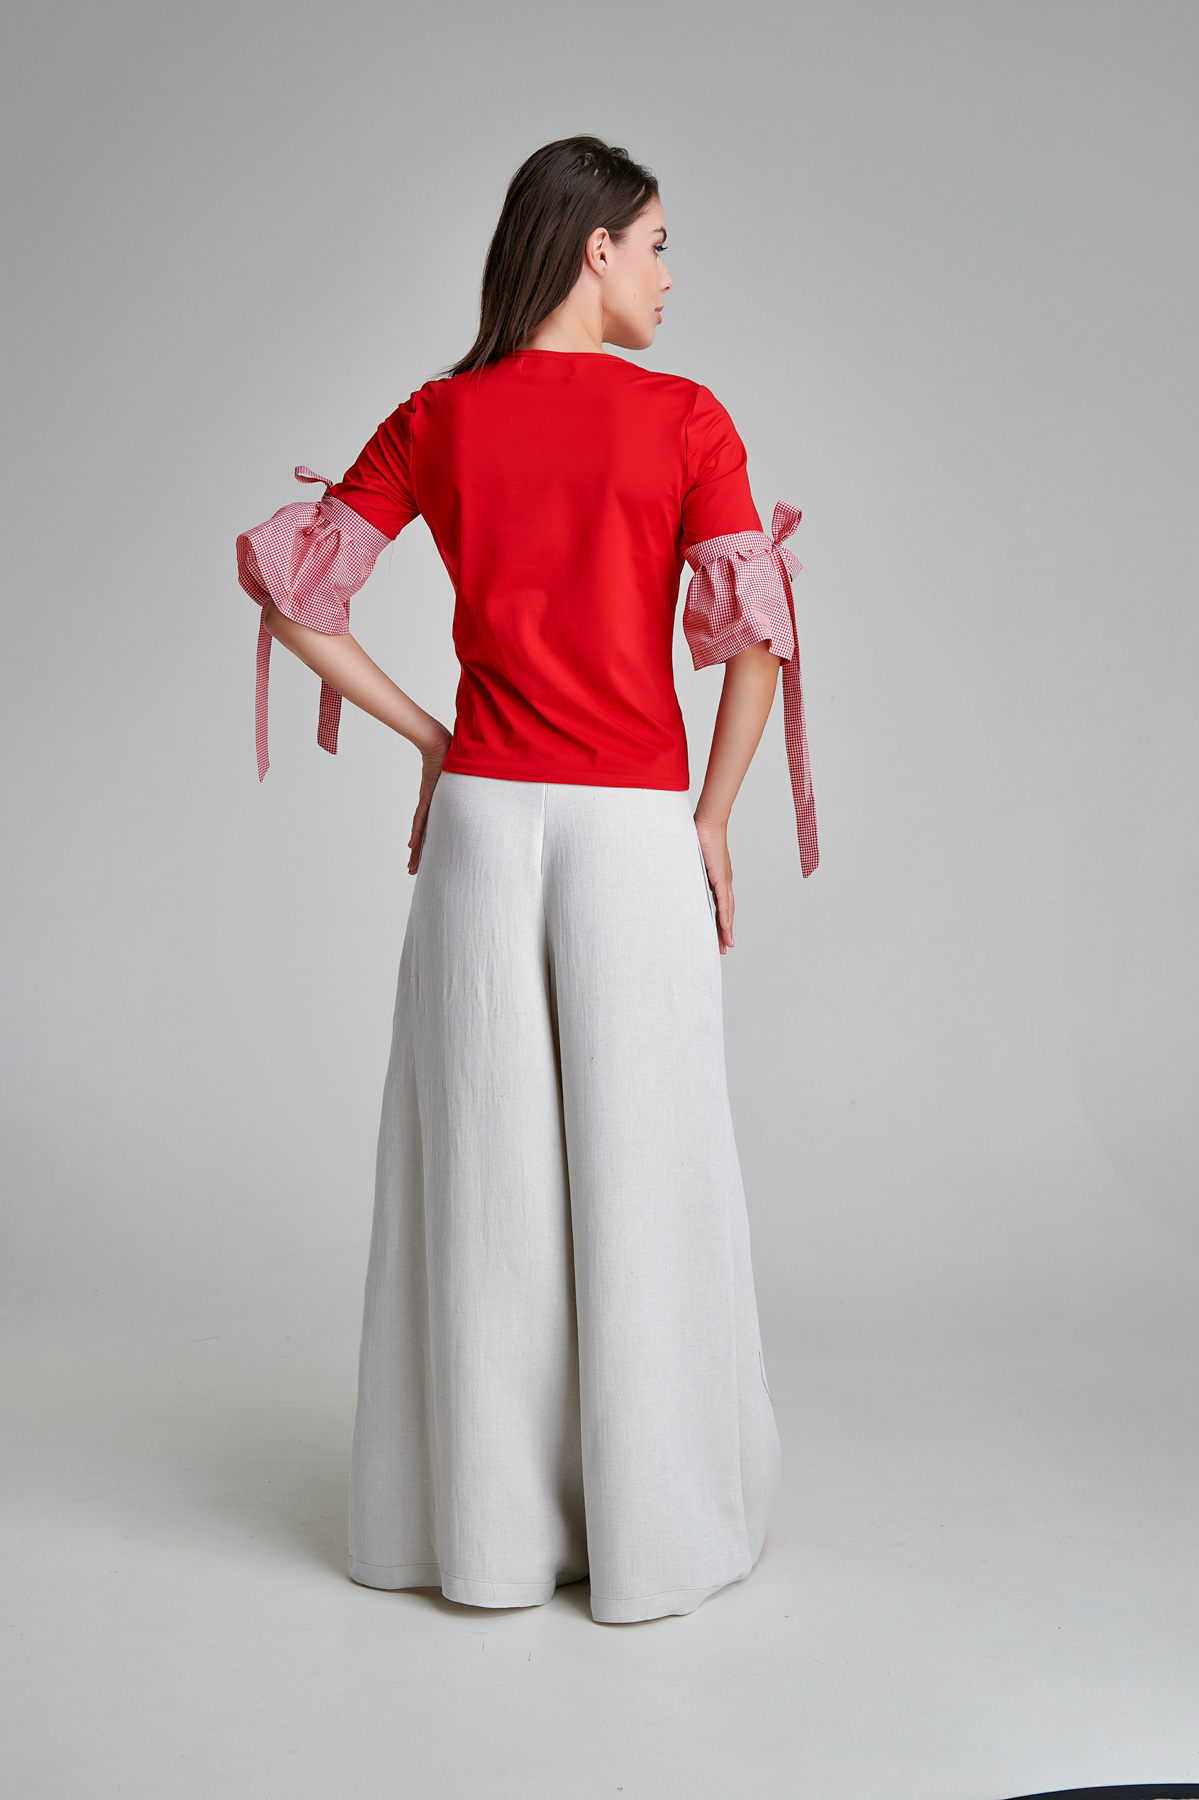 FAVI casual blouse with red cotton cuffs. Natural fabrics, original design, handmade embroidery